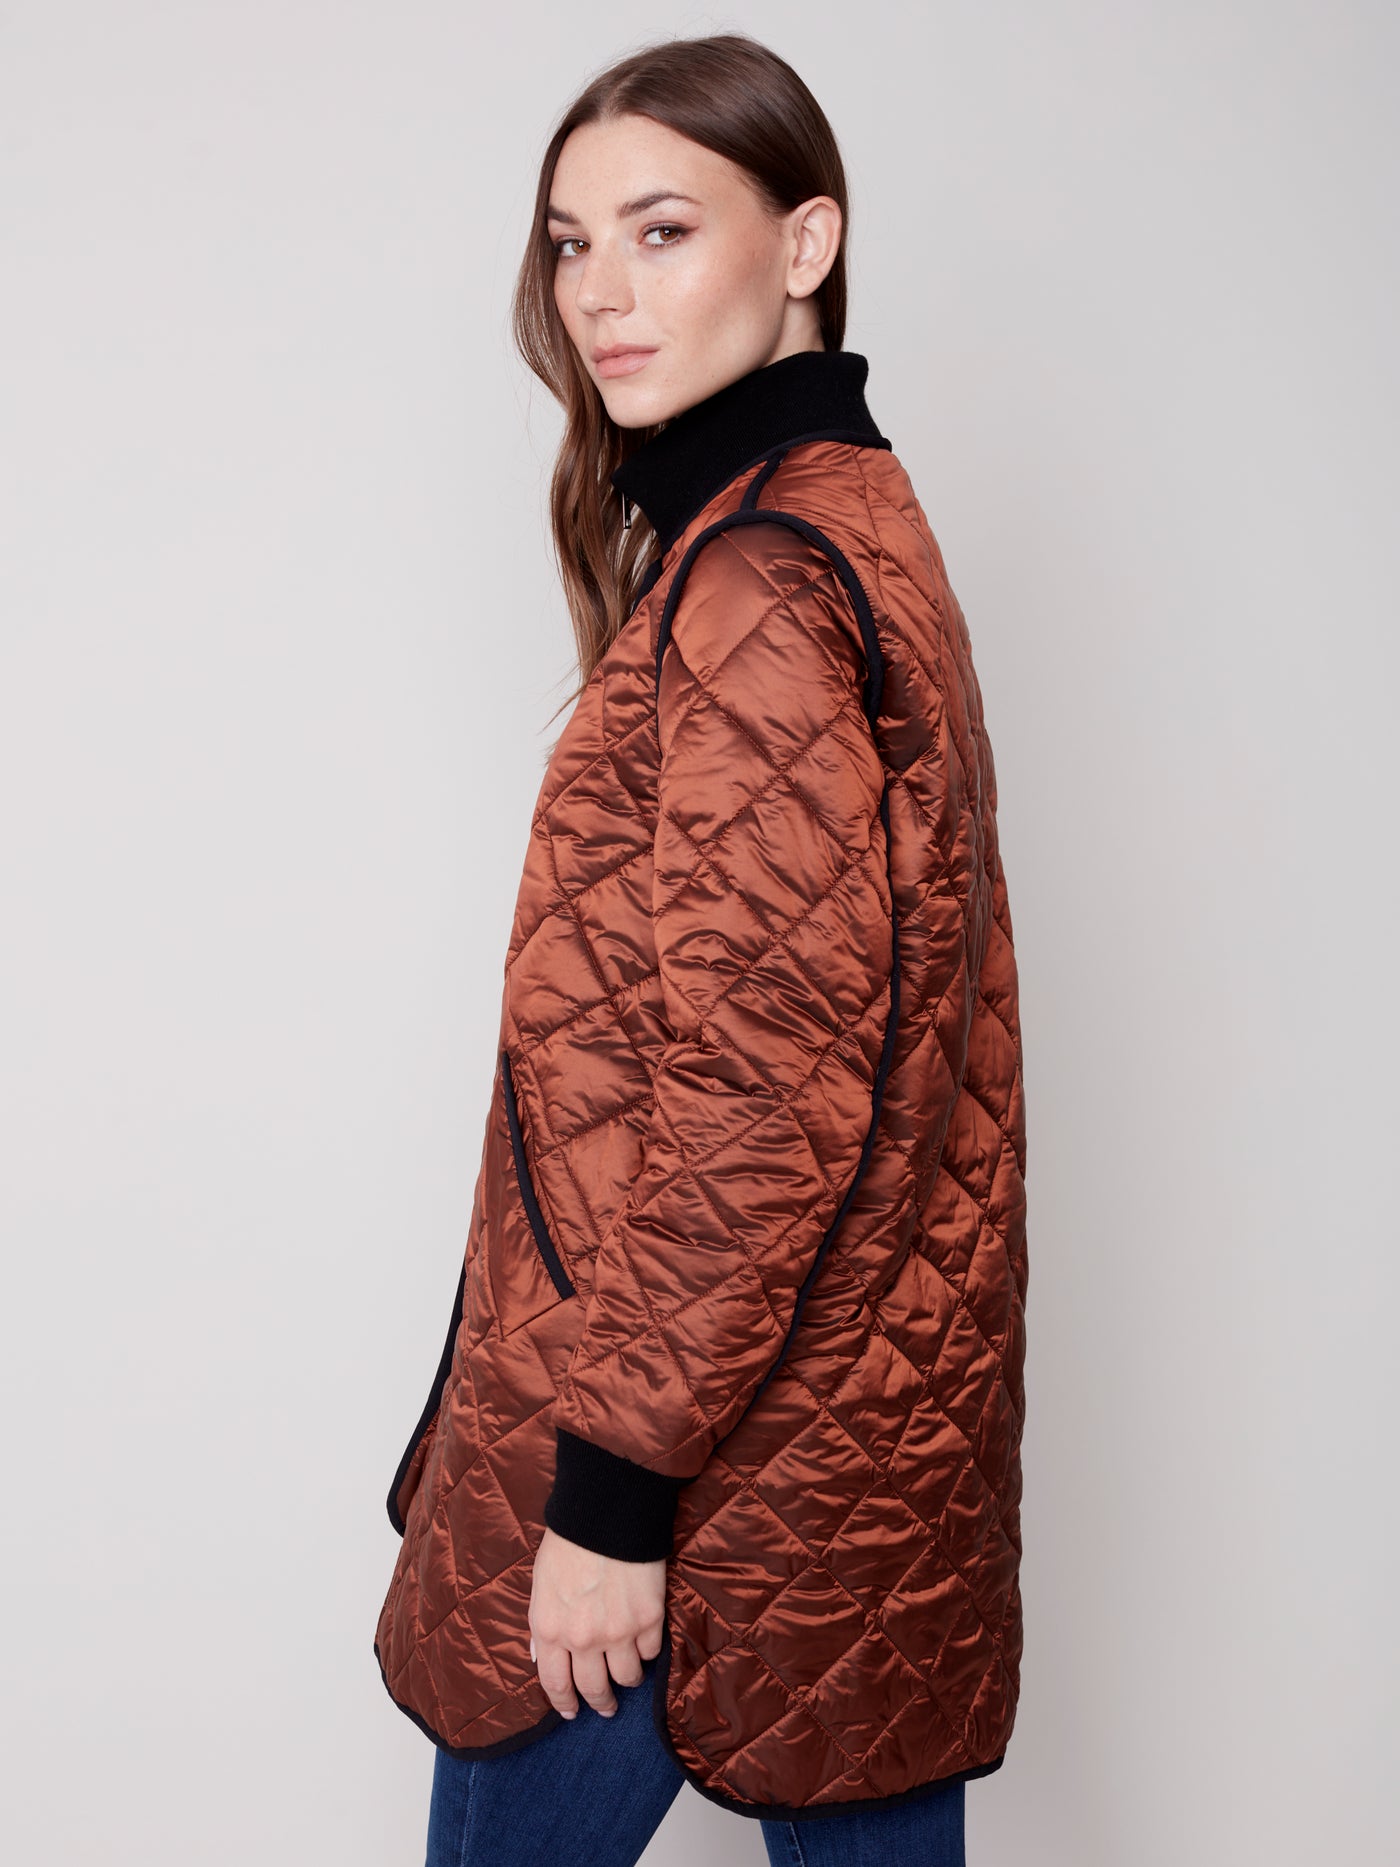 Cinnamon Iridescent Long Quilted Jacket